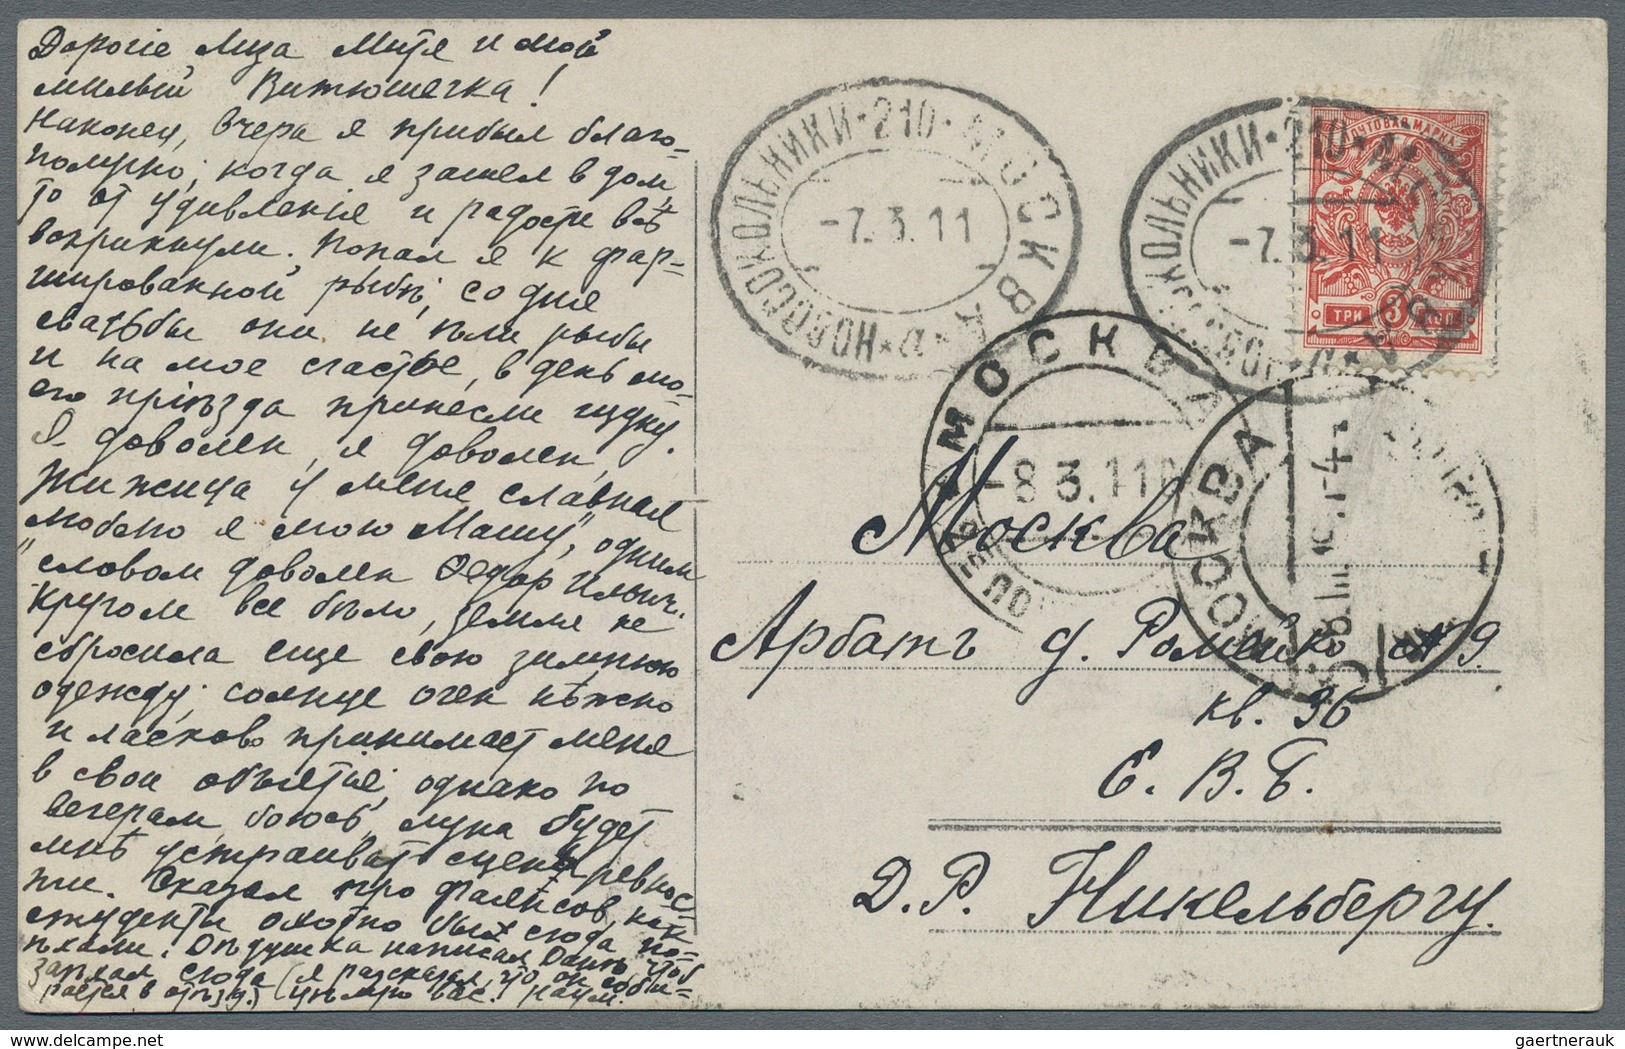 Russland: 1910/16 19 items canceled by different TPO's from/to Moscow, censored mail, registered mai